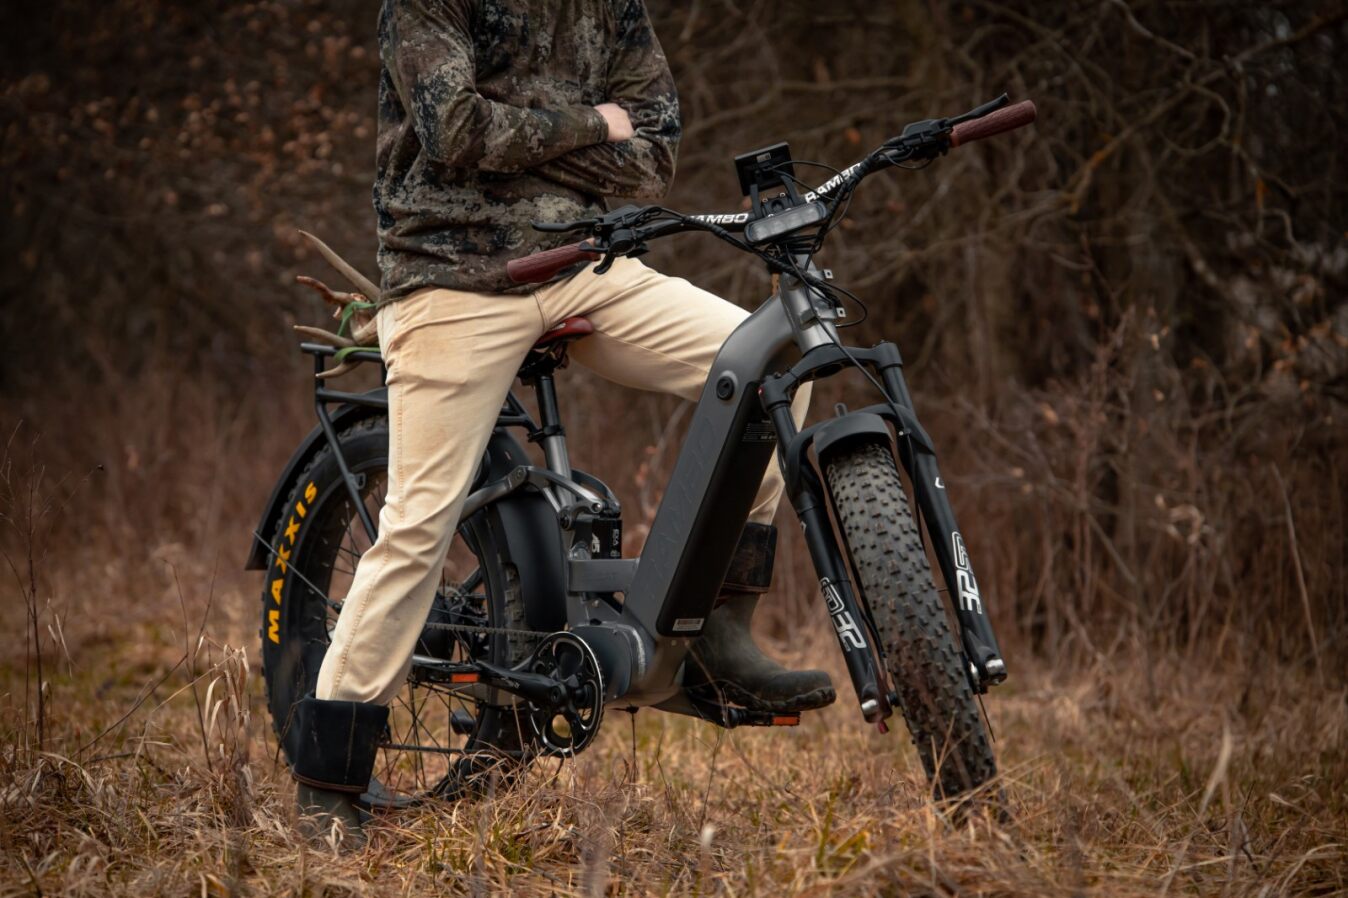 The Rambo Hellcat in Gunmetal Grey with its rider, out in the woods